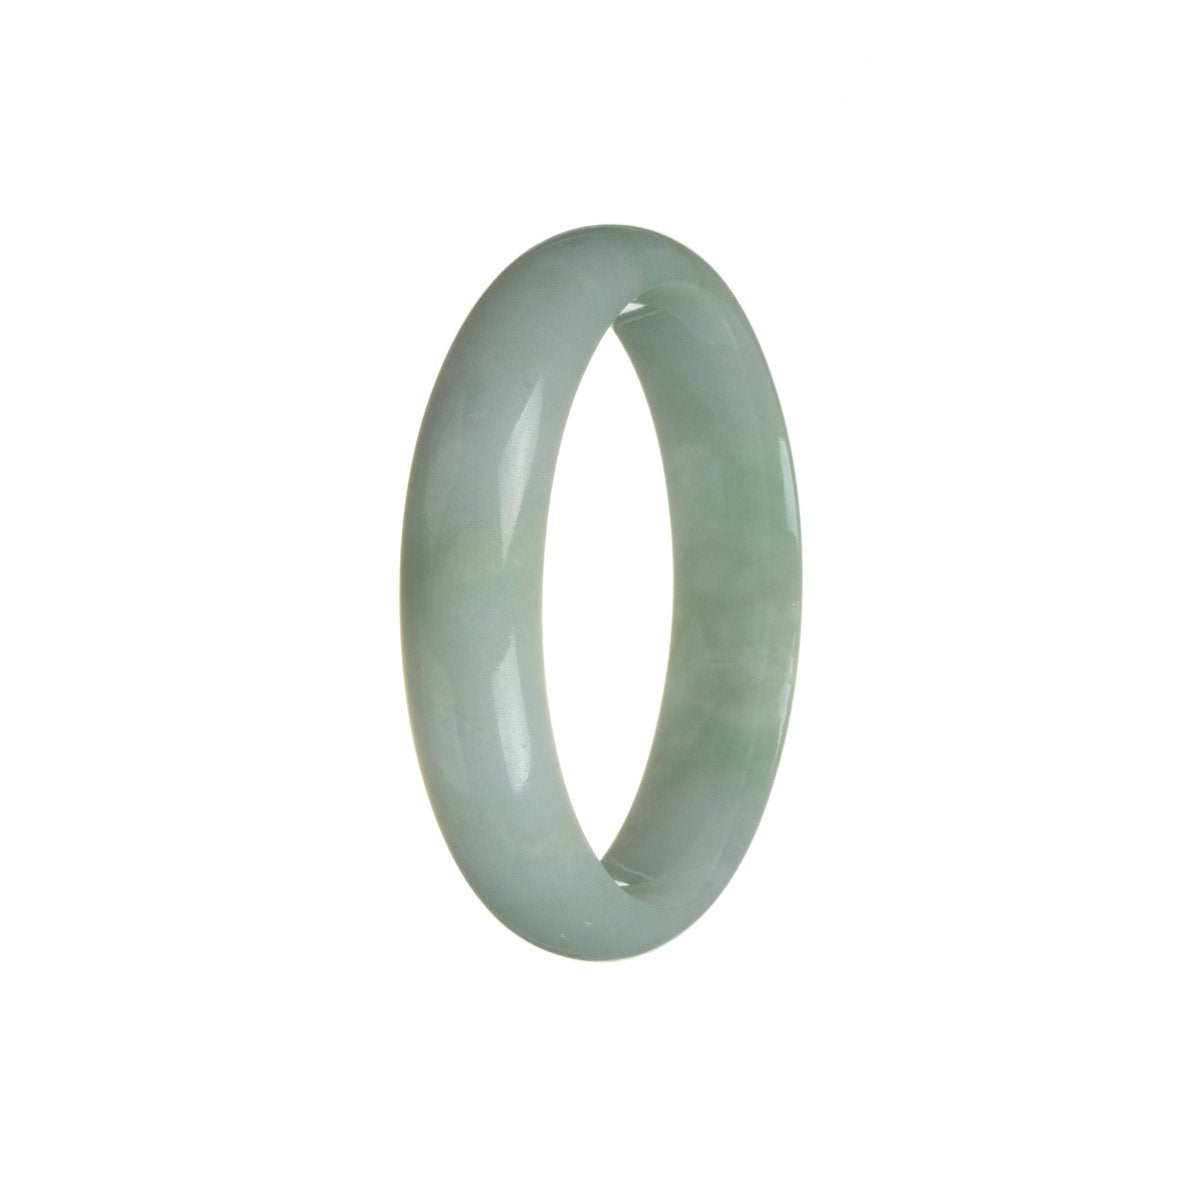 A stunning green and pale lavender jade bracelet with a half moon design, made from high-quality Grade A jade.